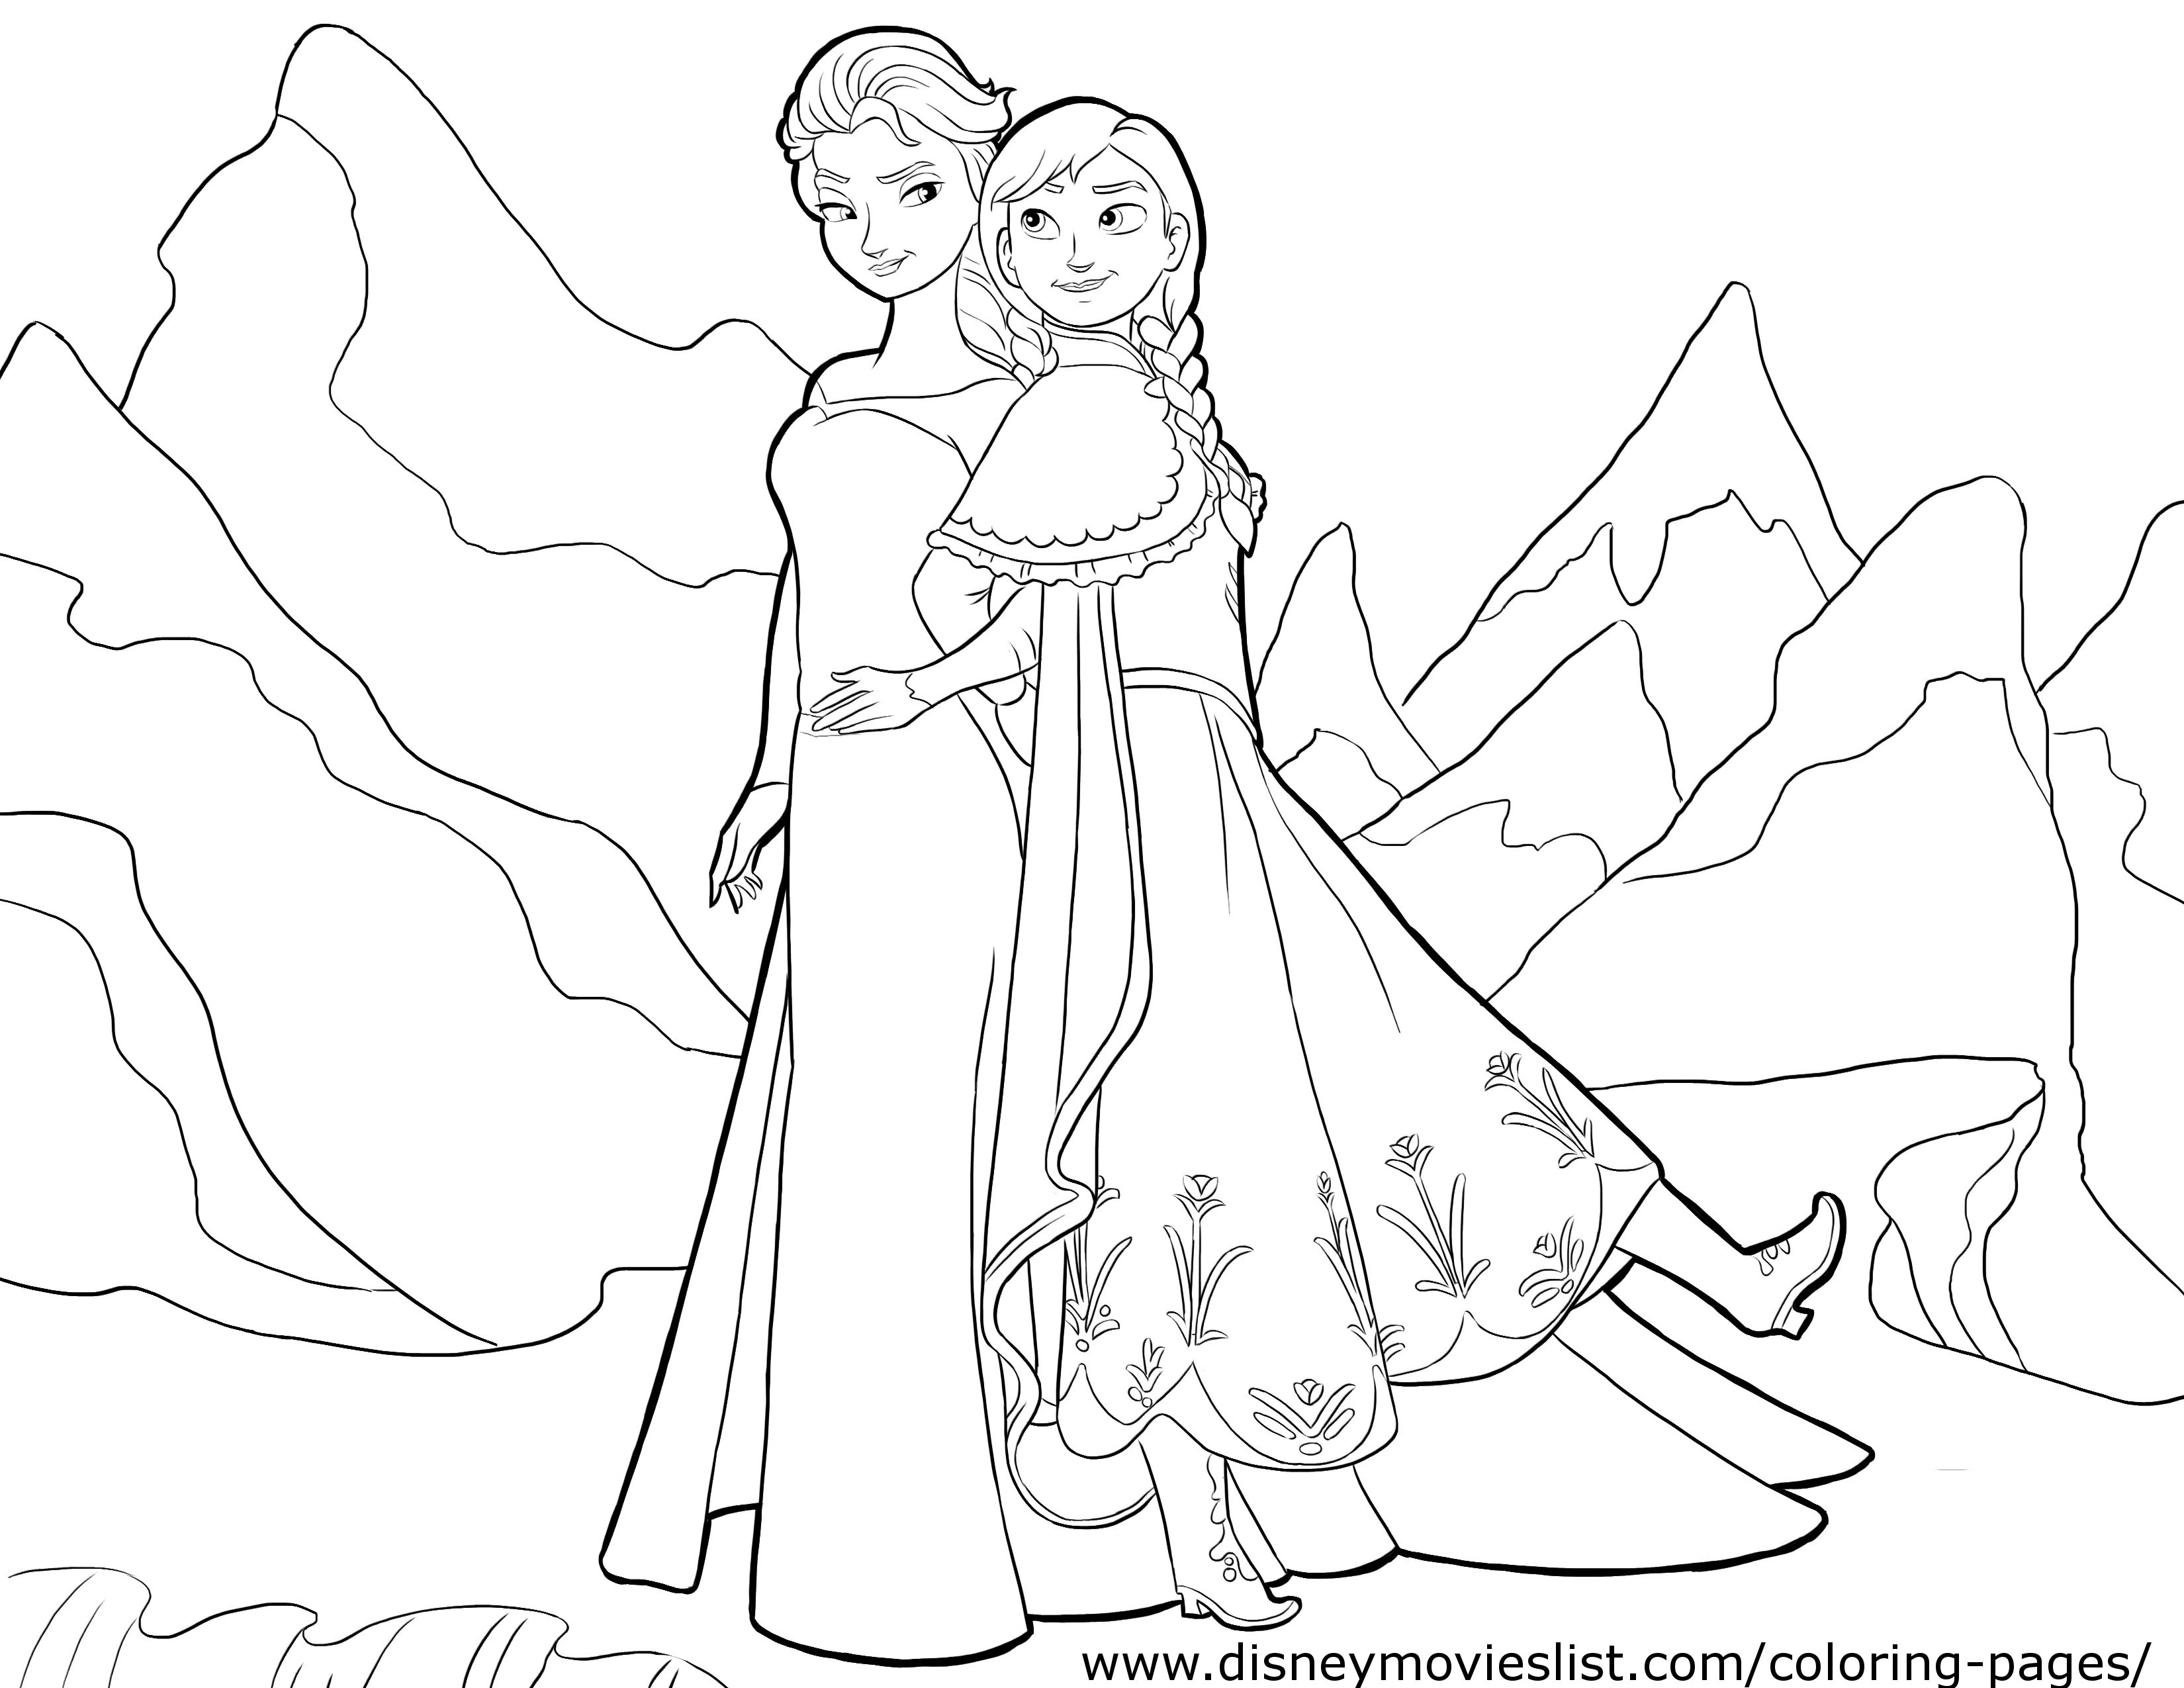  Two princess nature coloring pages for kids